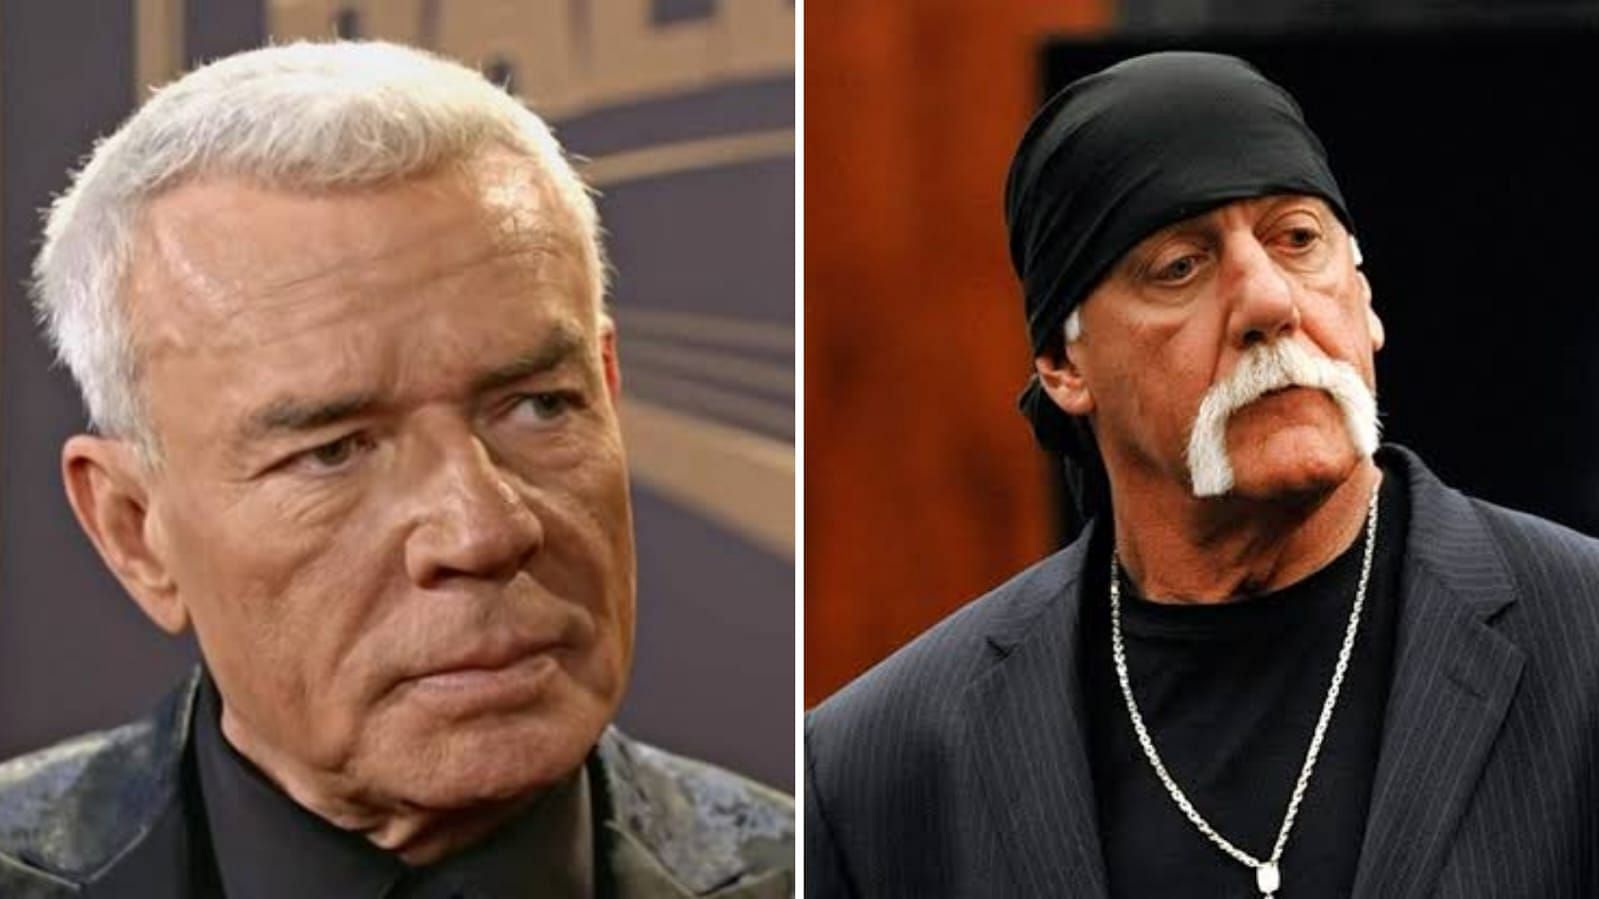 Hulk Hogan and Eric Bischoff are two of the most influential names in wrestling.